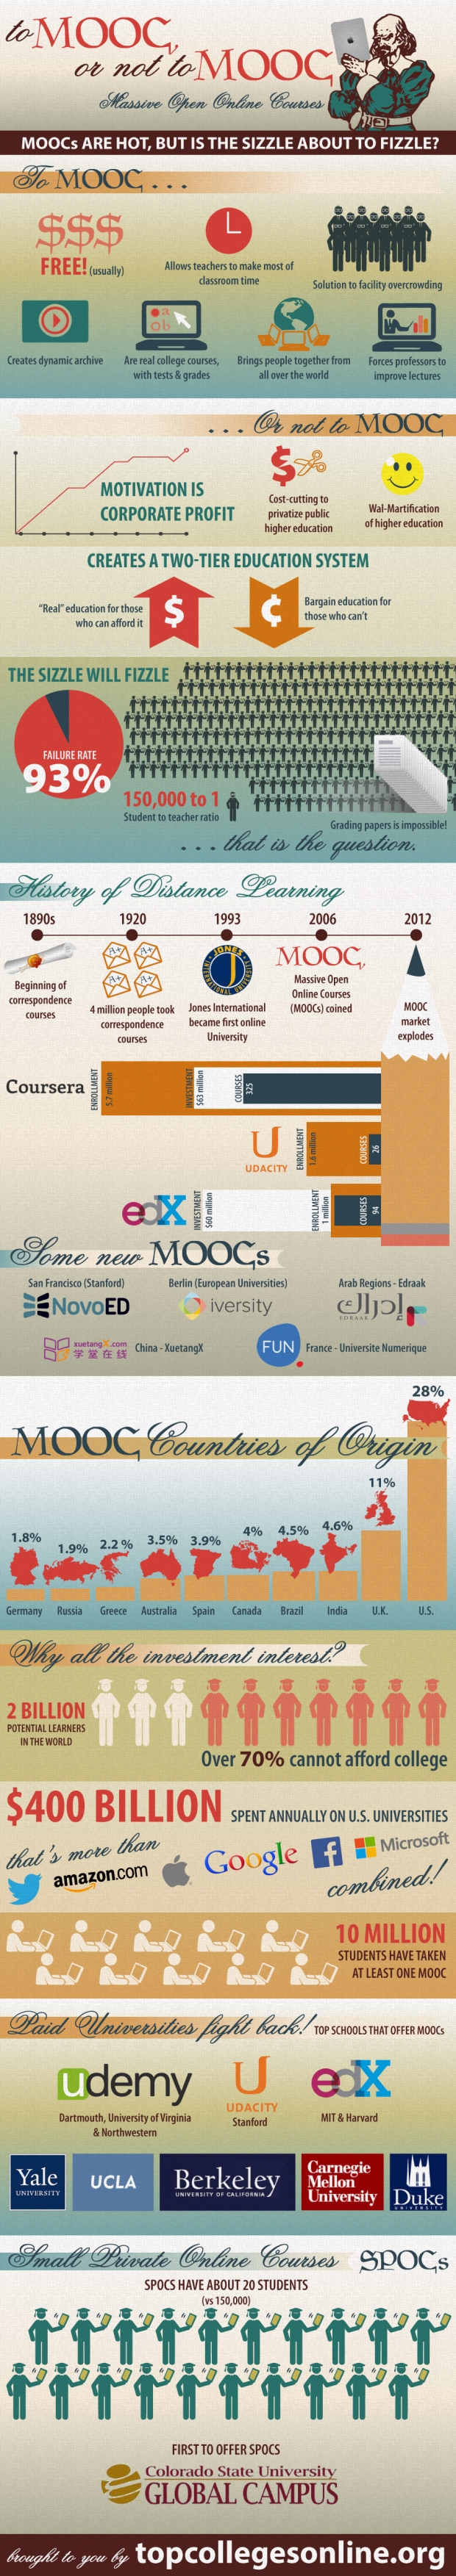 To-MOOC-or-Not-to-MOOC-Infographic-620x3506